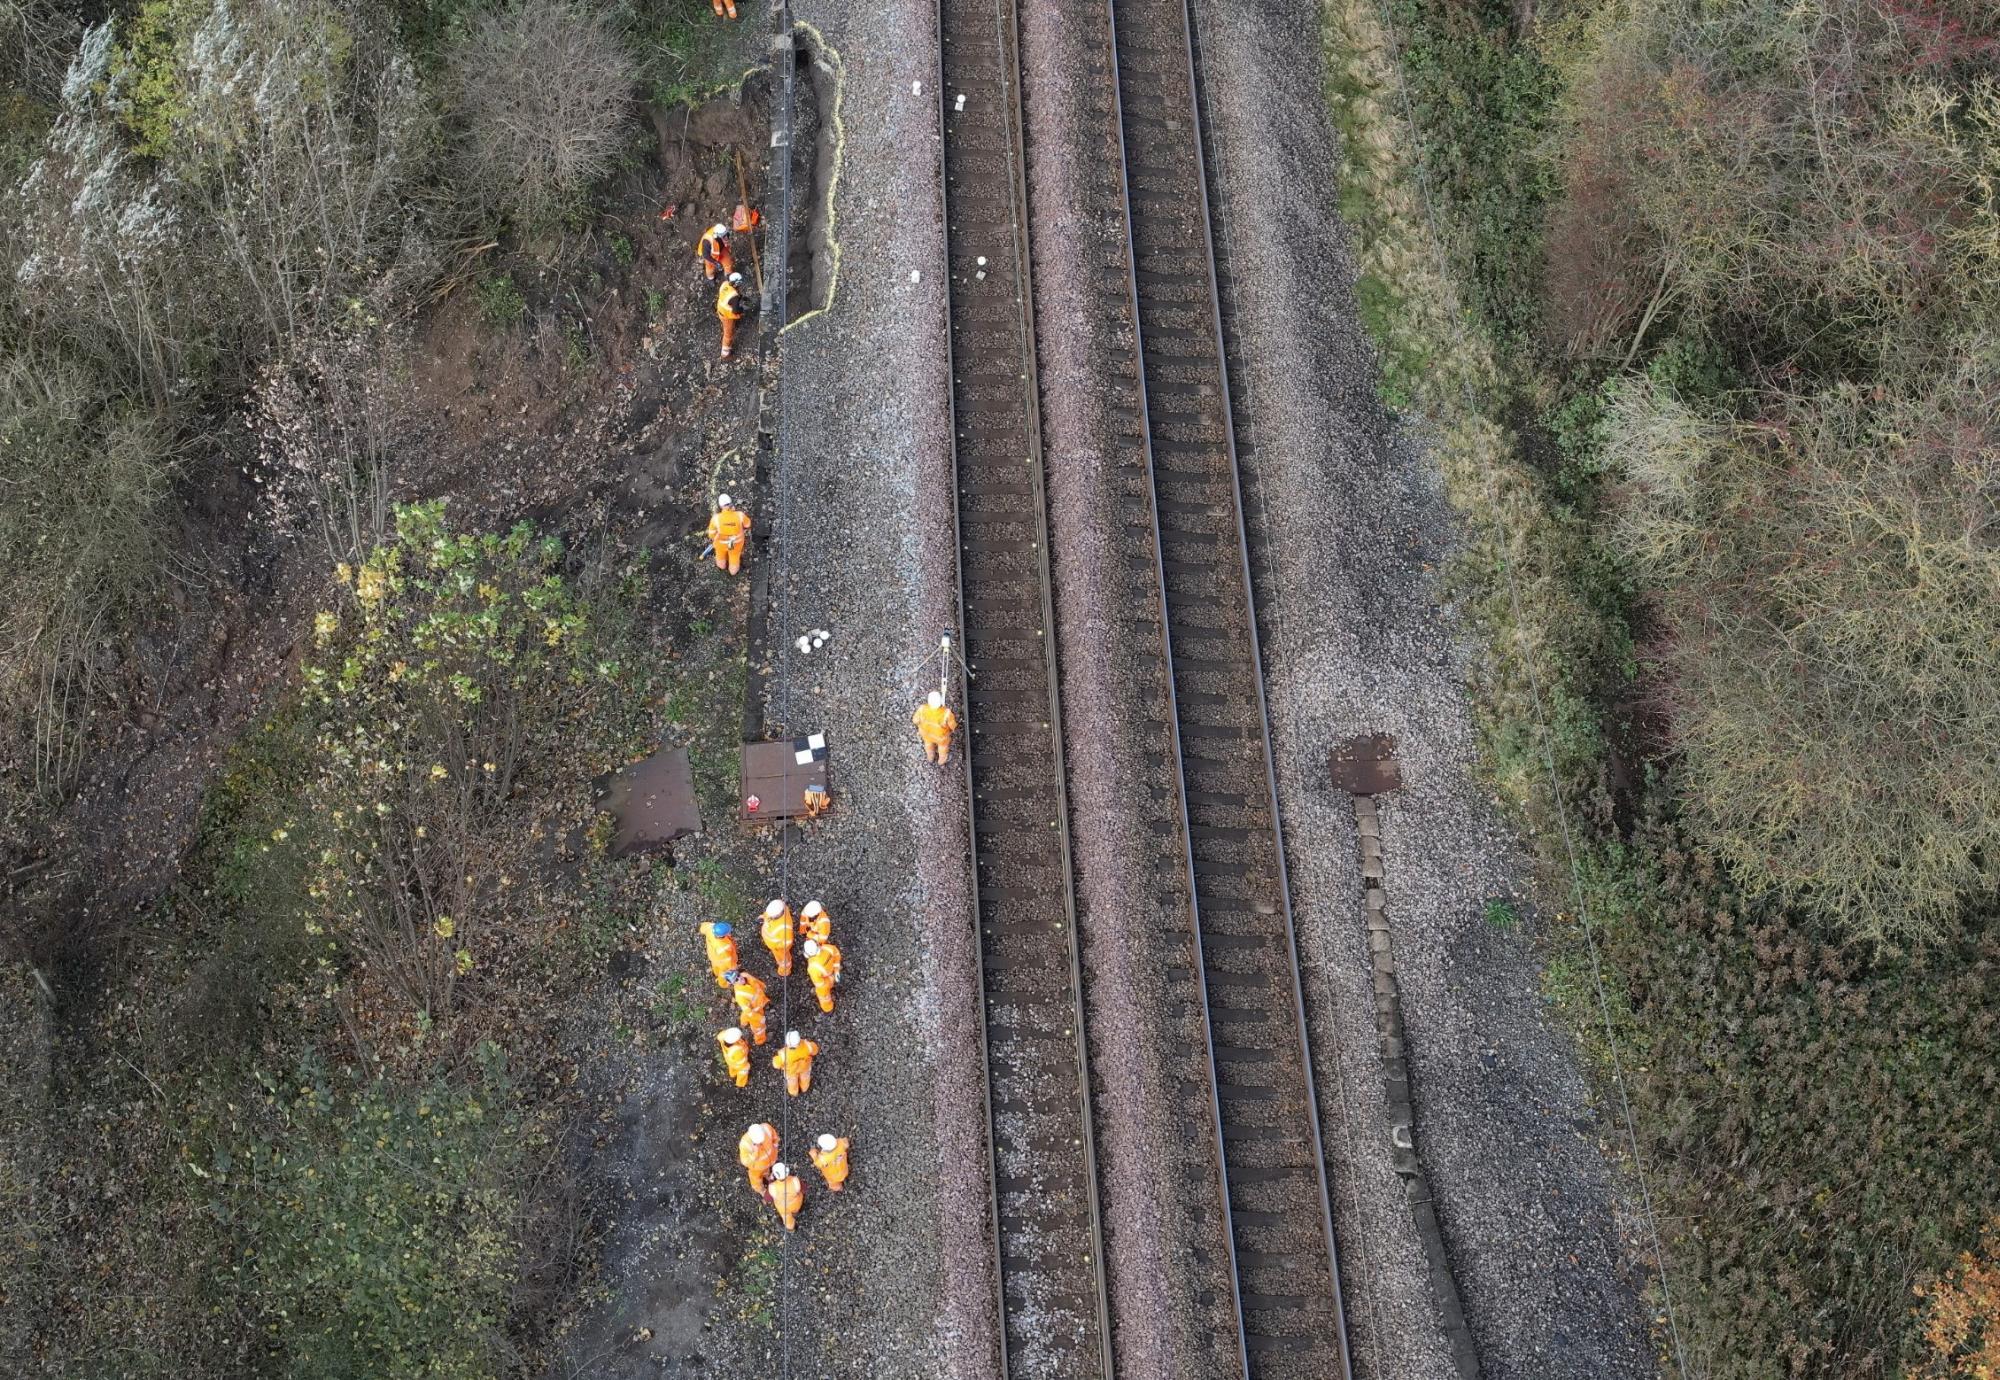 Engineers working on a landslip at Aycliffe